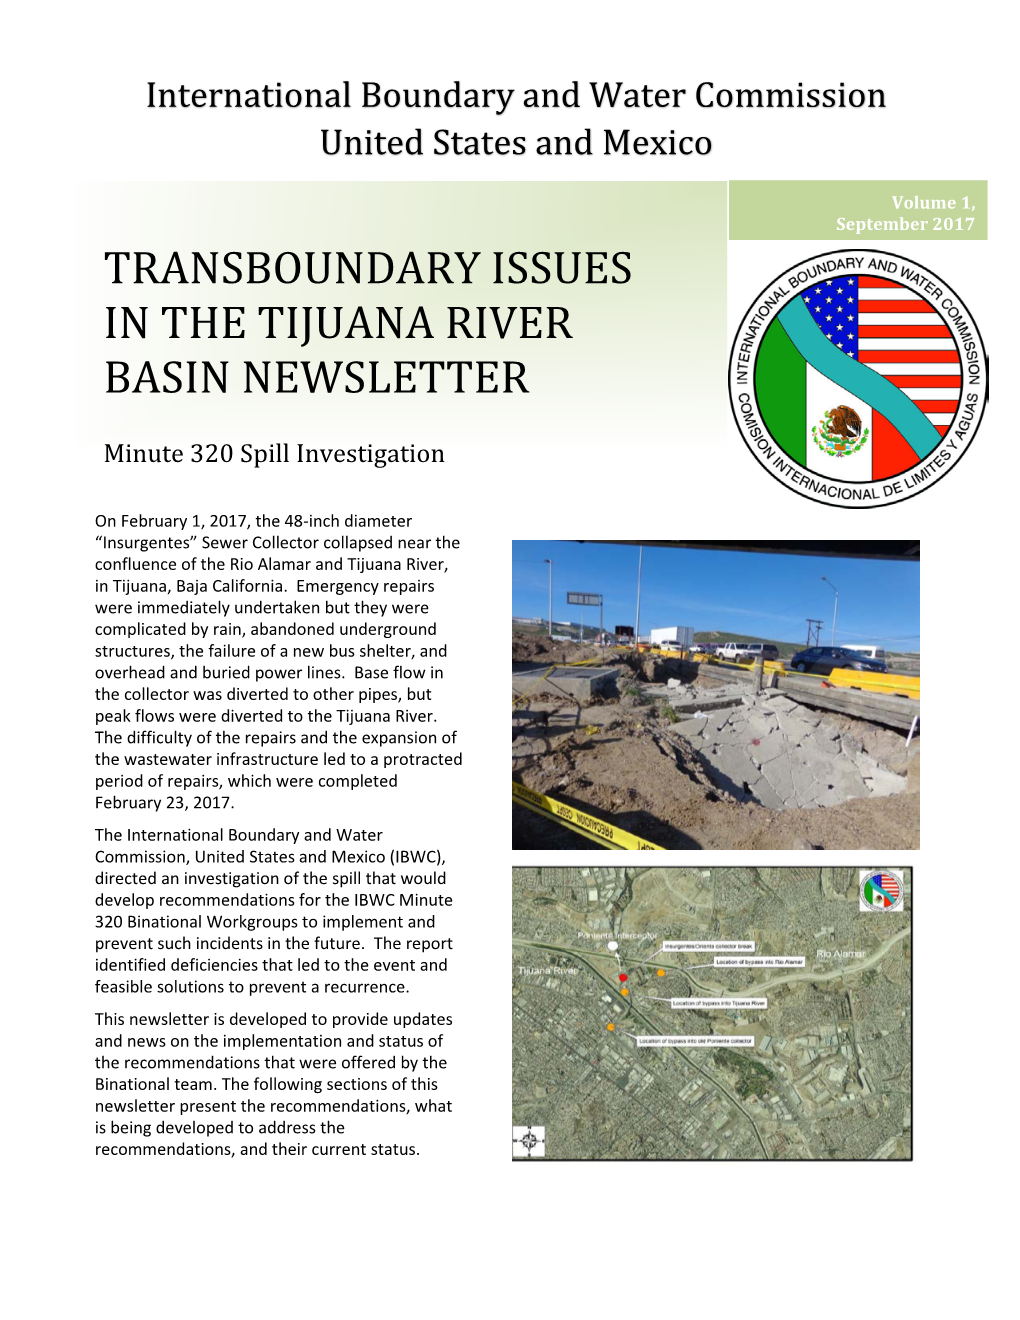 Transboundary Issues in the Tijuana River Basin Newsletter